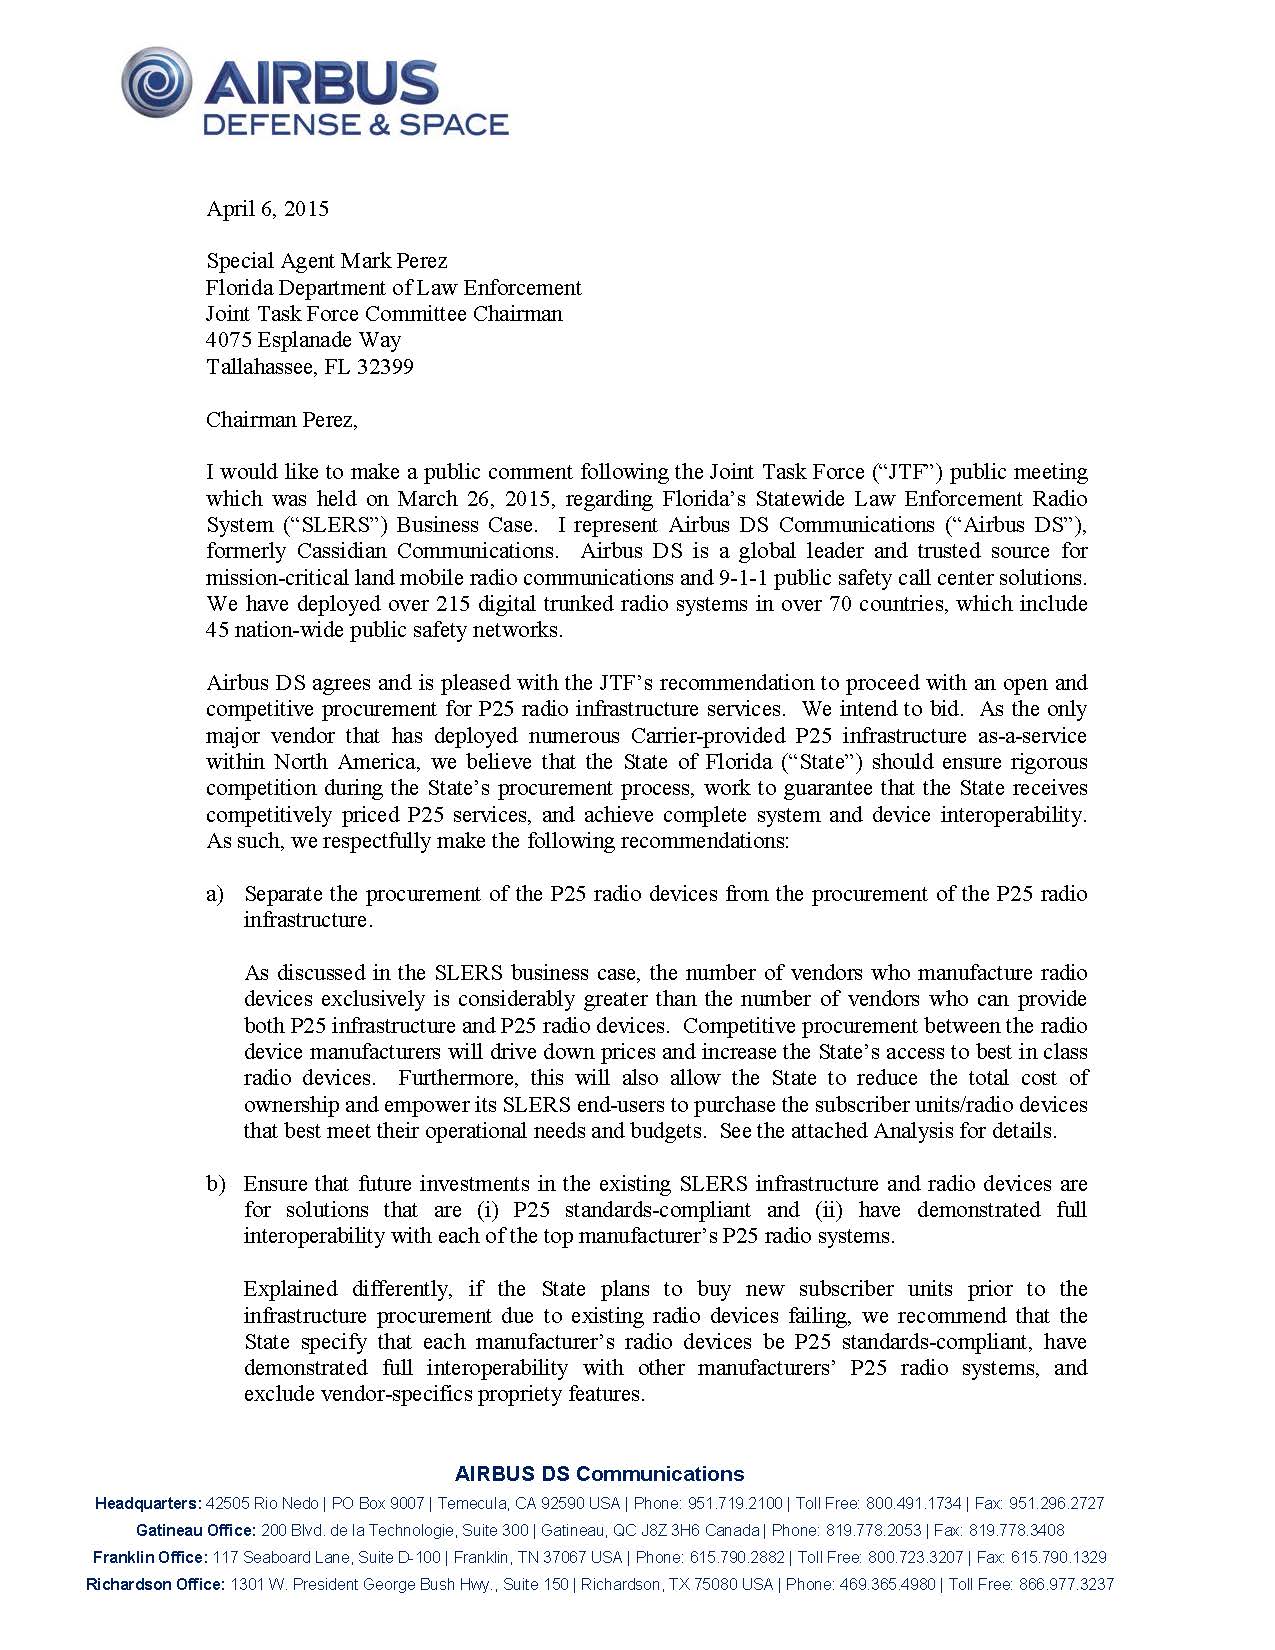 Letter Florida JTF Chairman Perez Airbus_Page_1